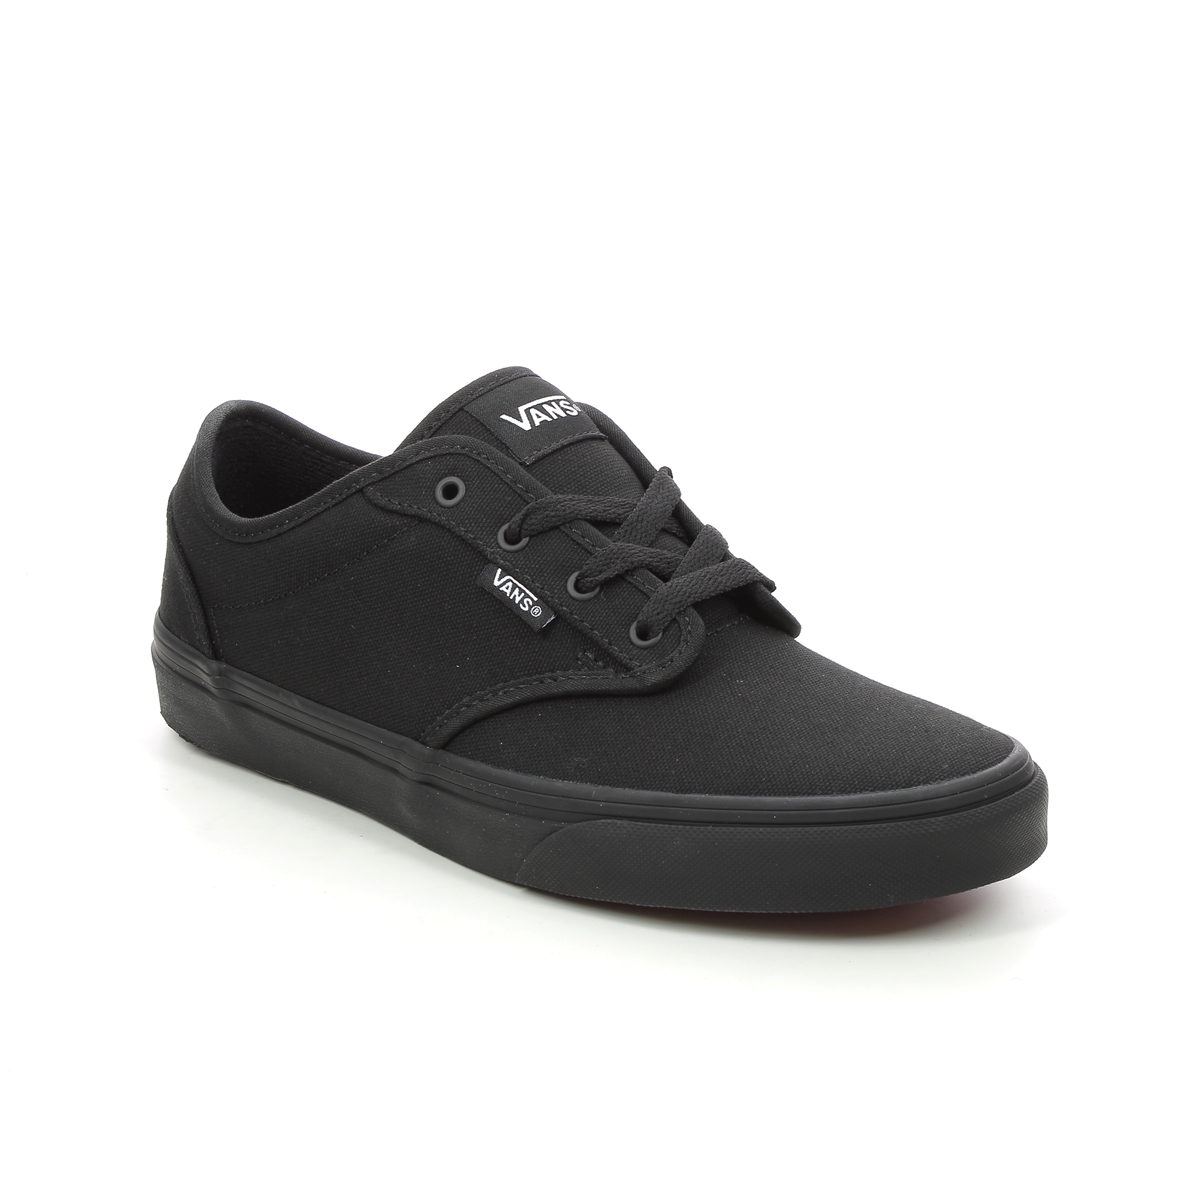 Vans Atwood Youth Black Kids Trainers  Vki5186 In Size 6 In Plain Black Vans Boys Trainers For School For kids